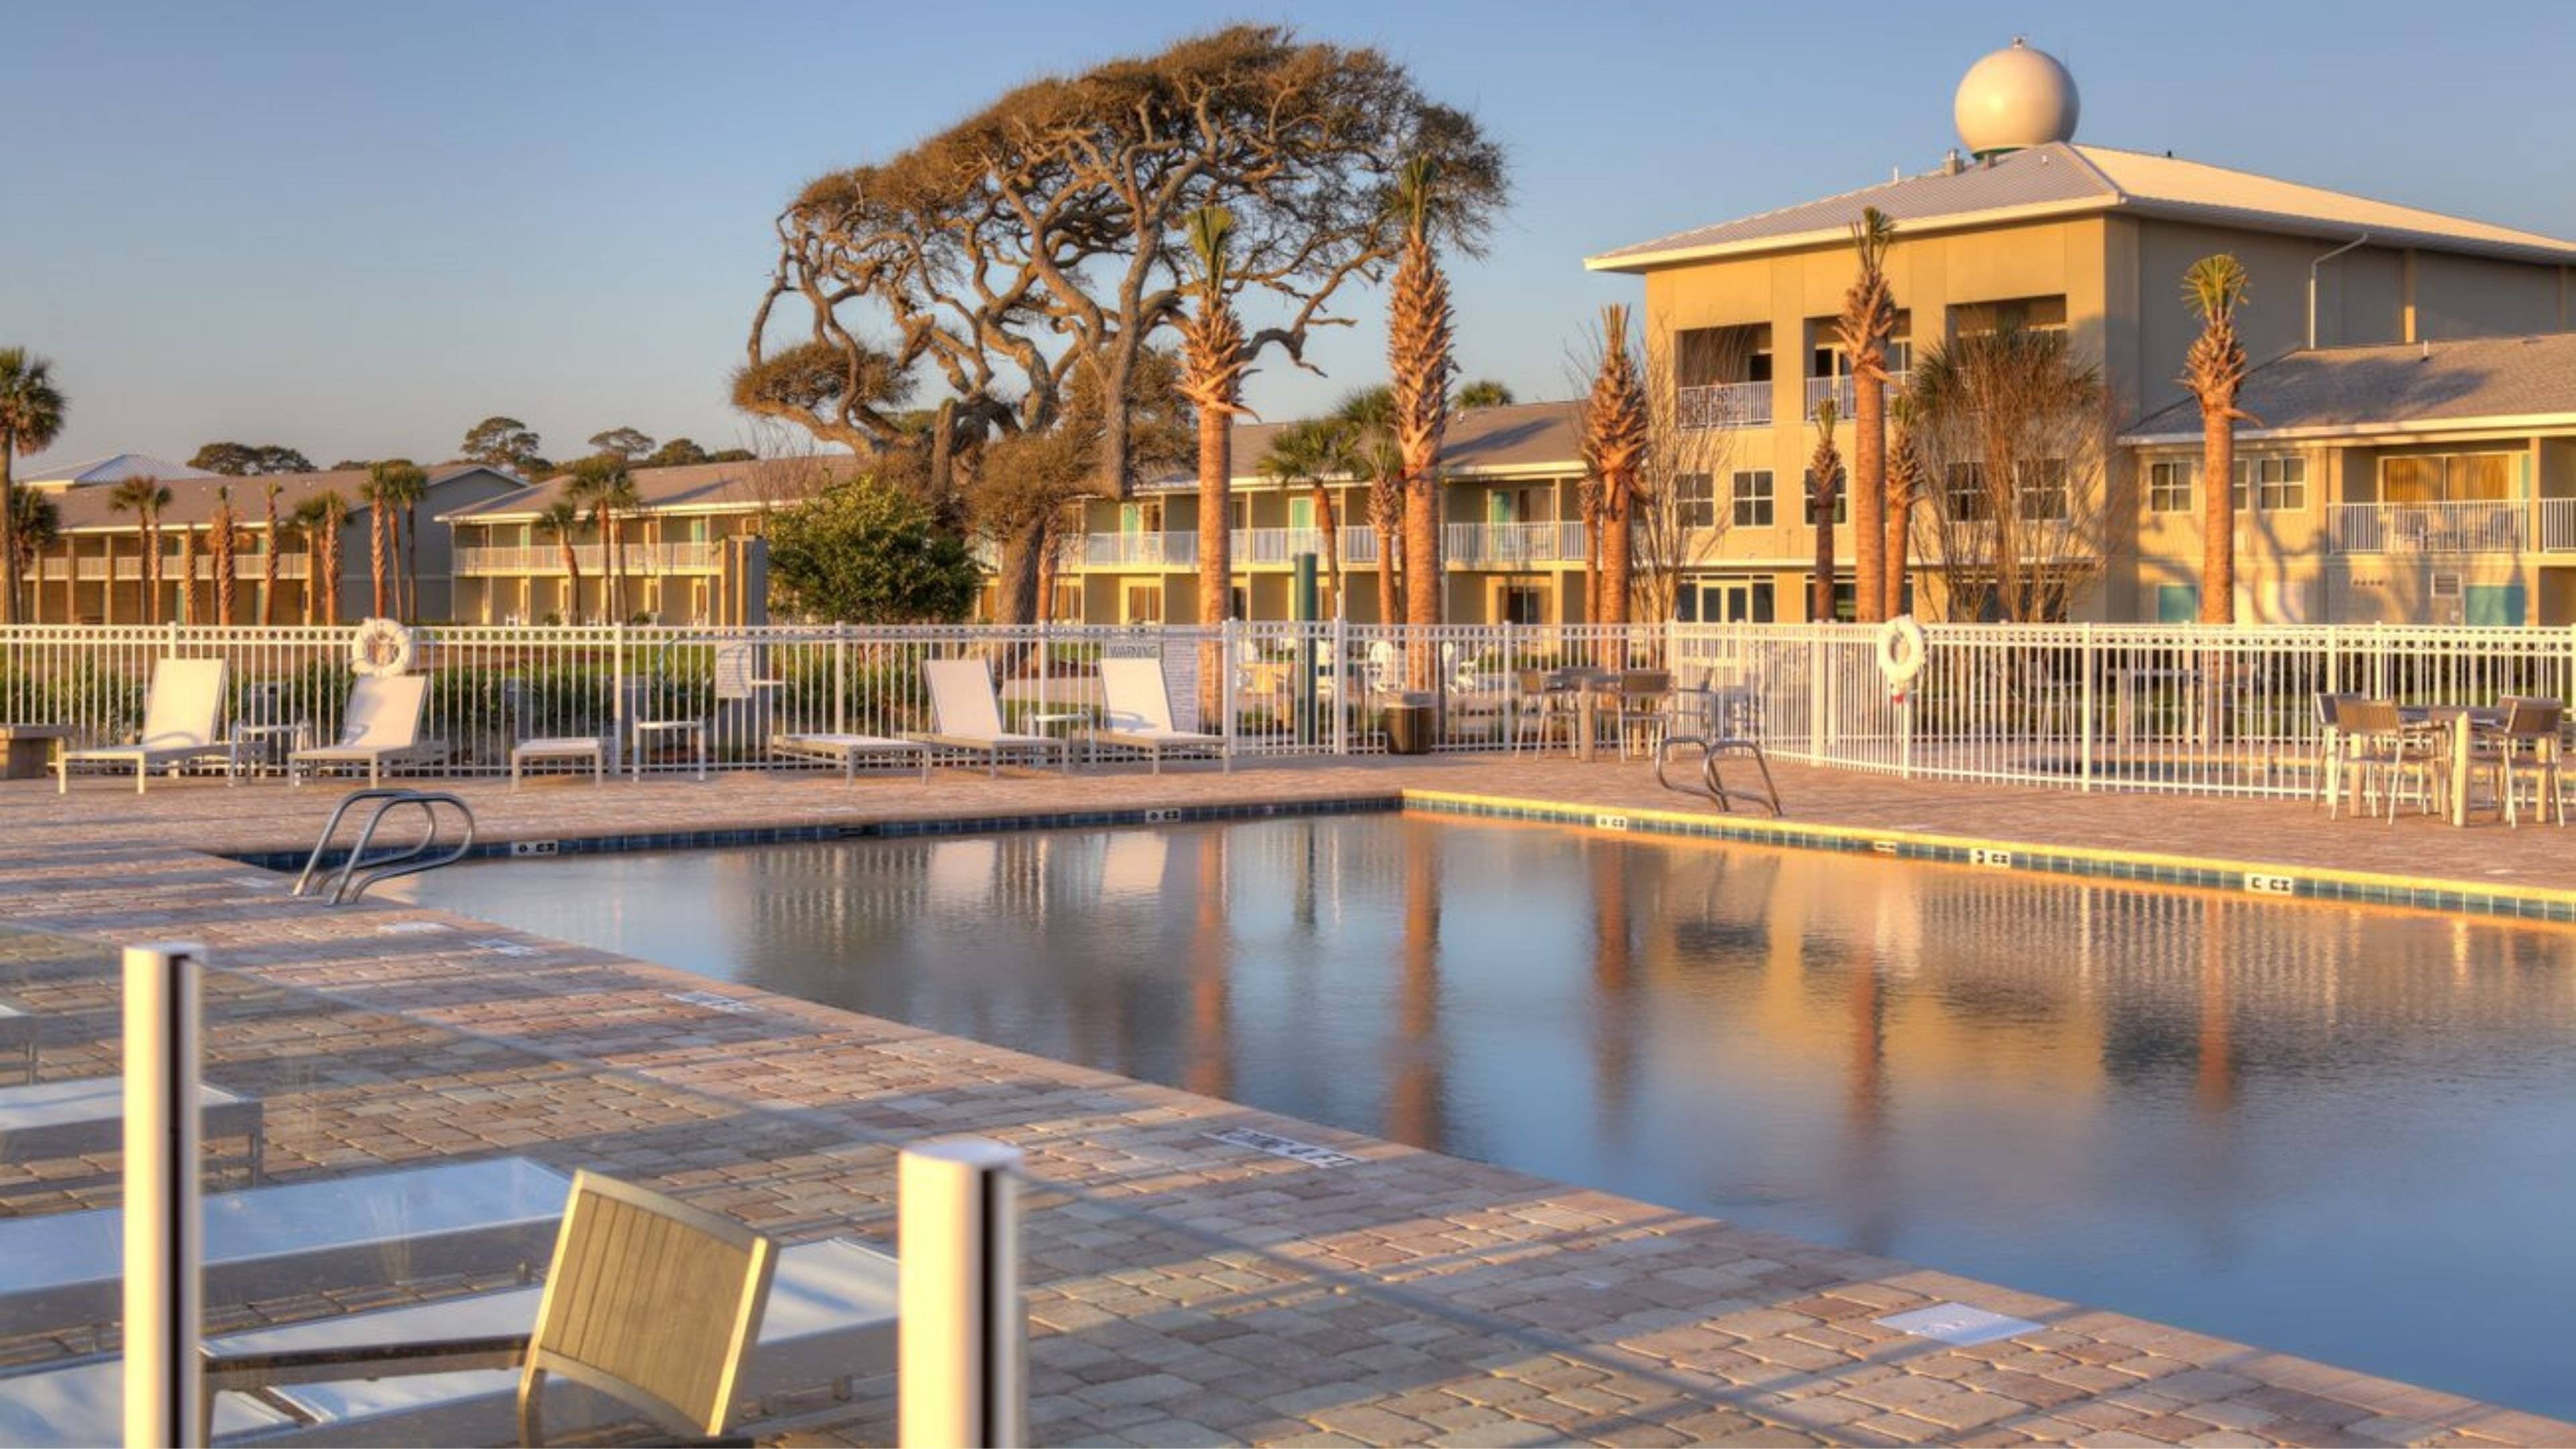 Guests love to enjoy our outdoor pool overlooking the ocean